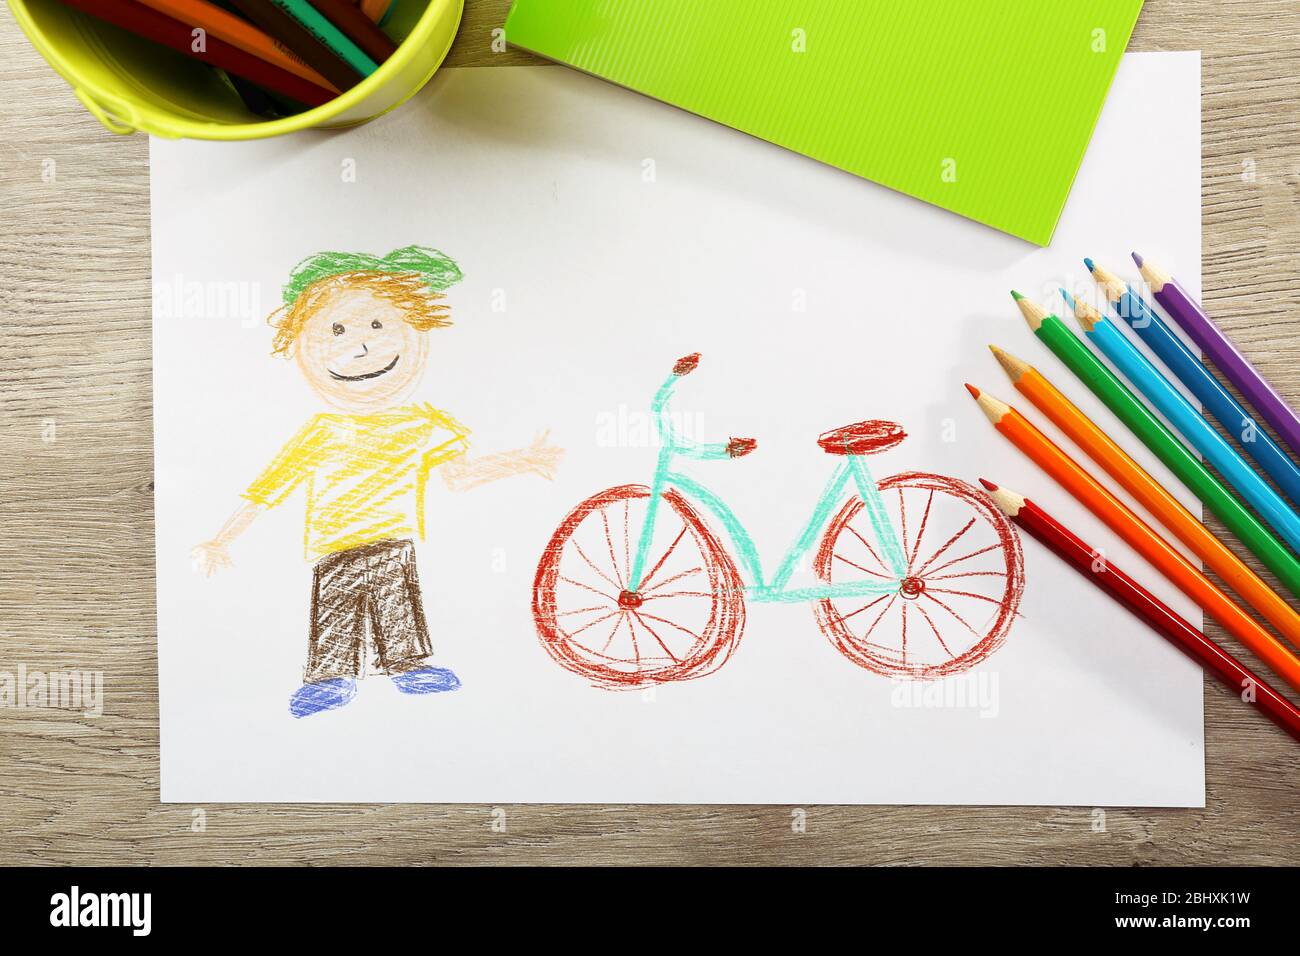 Kids Drawing On White Sheet Of Paper Background Stock Photo